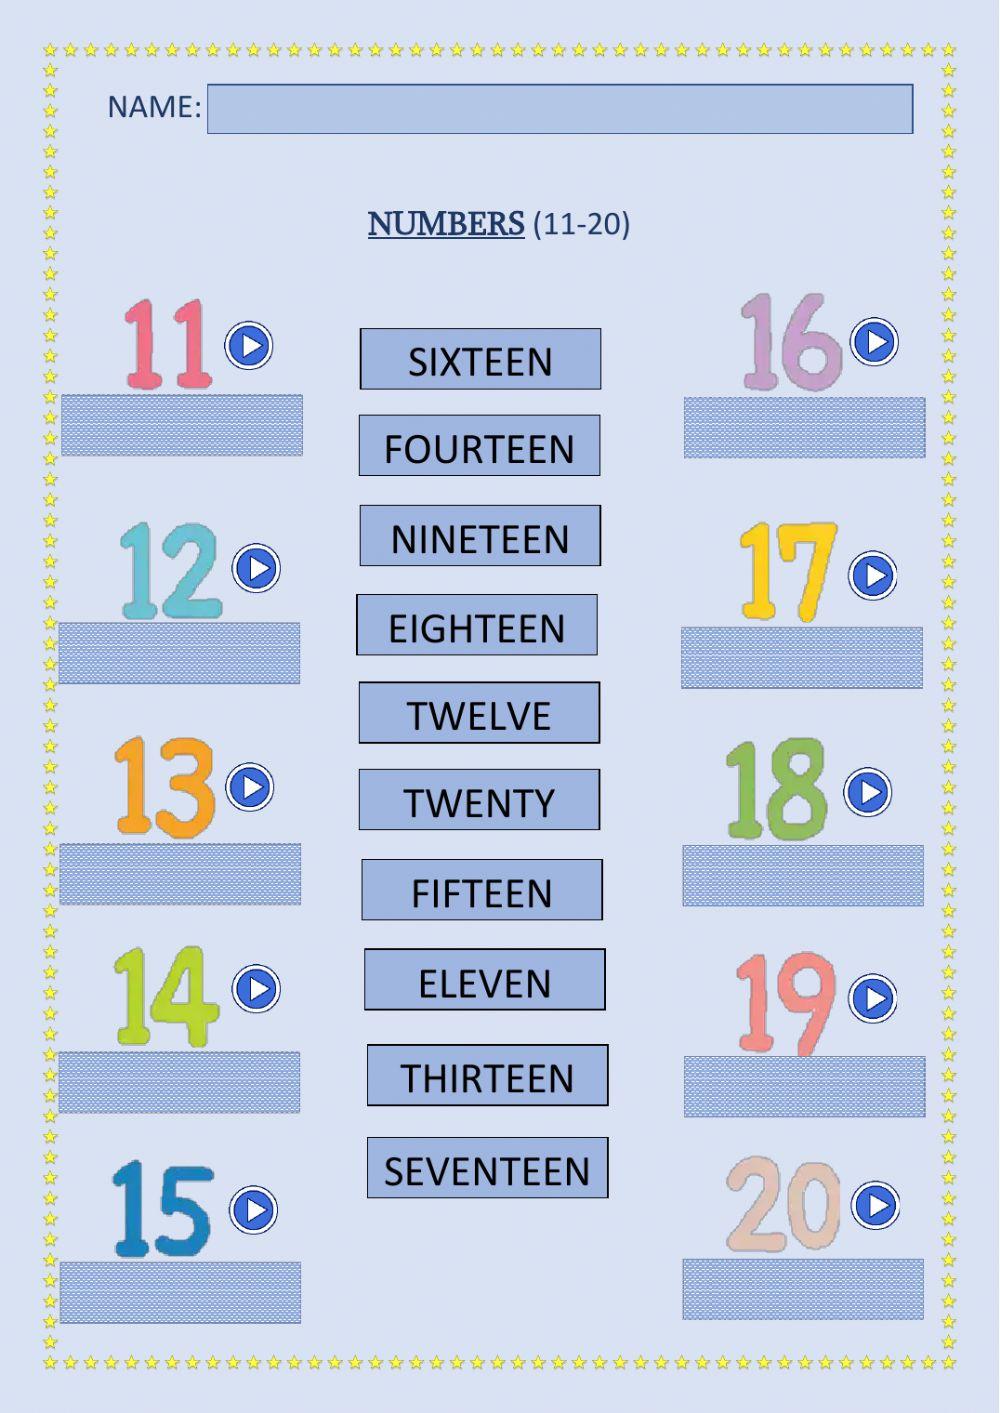 Numbers (11-20)